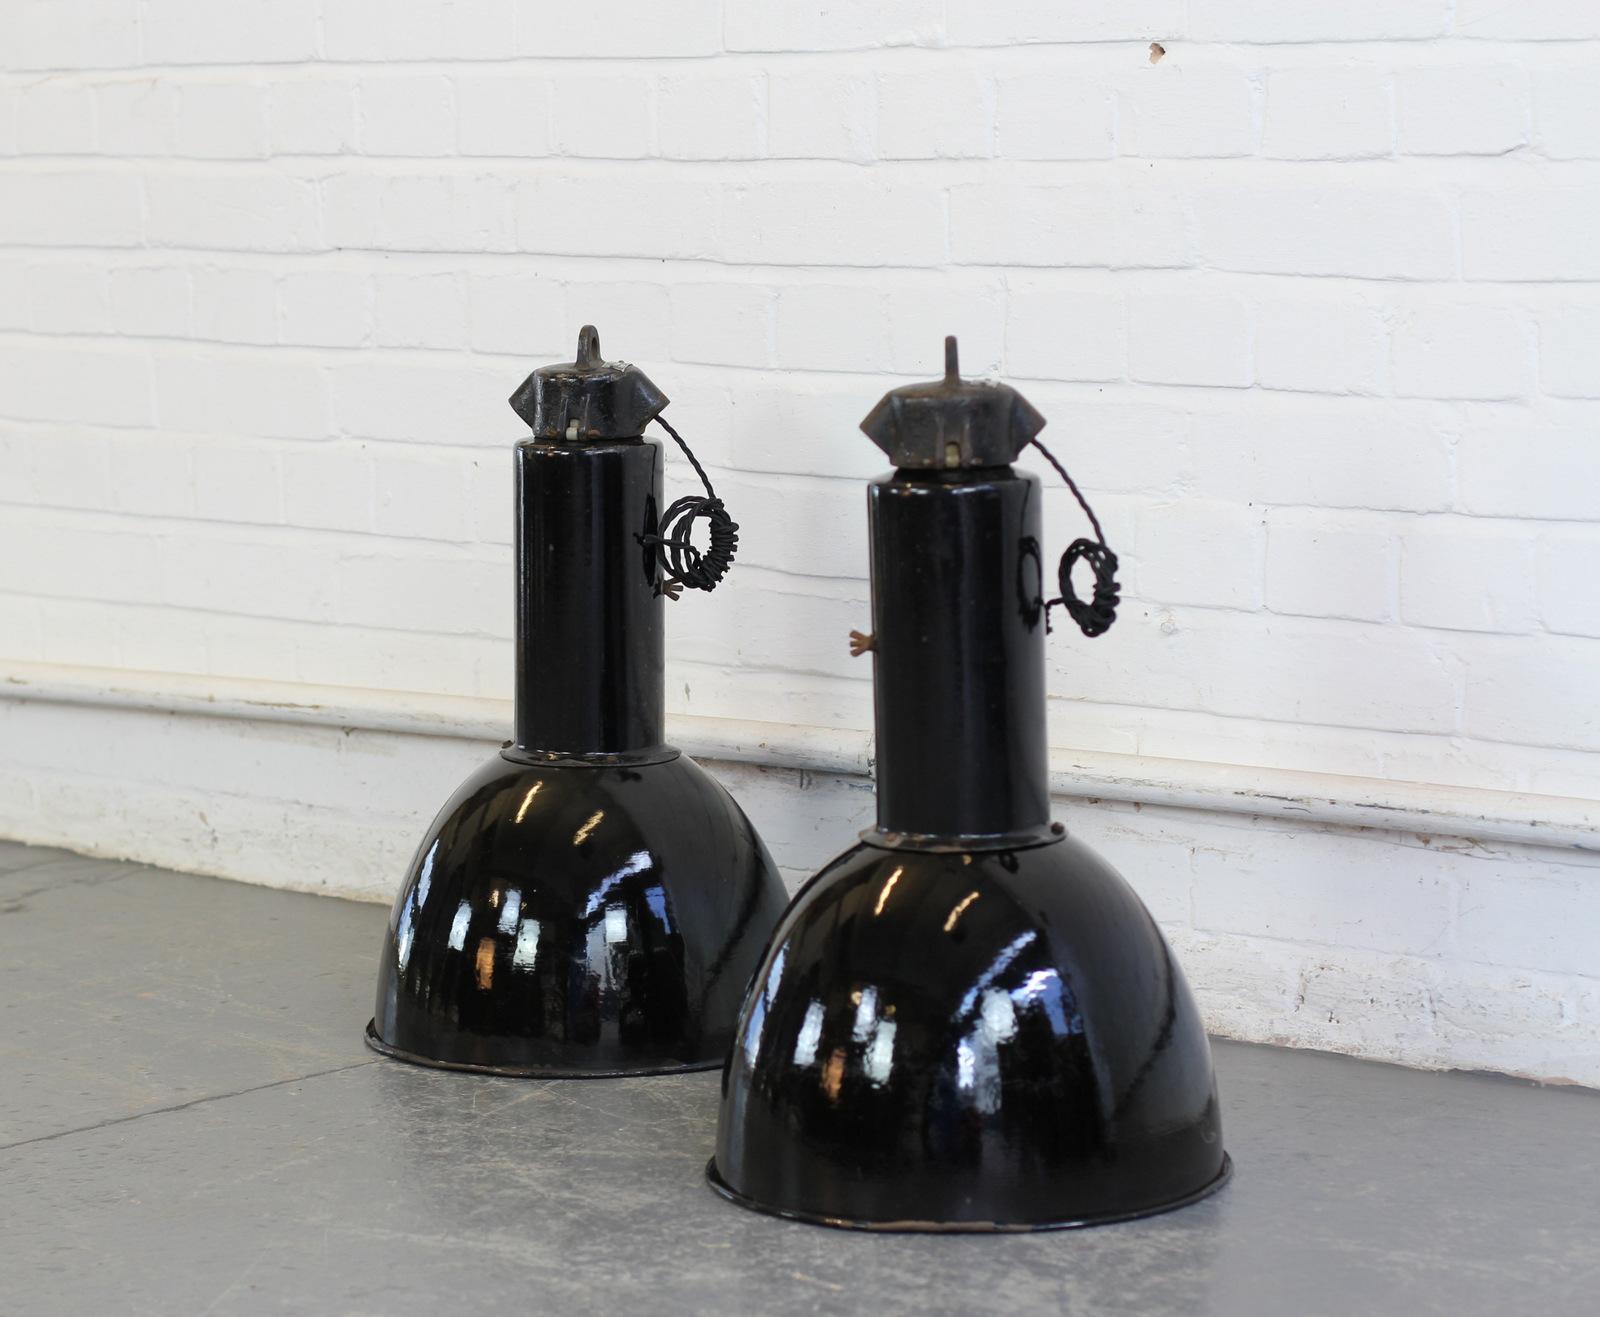 Bauhaus industrial pendant lights, circa 1930s.

- Price is per light (2 available)
- Vitreous black enamel with white enamel inner reflectors
- Cast iron tops
- Takes E27 fitting bulbs
- Comes with 100cm of black twist cable
- Comes with